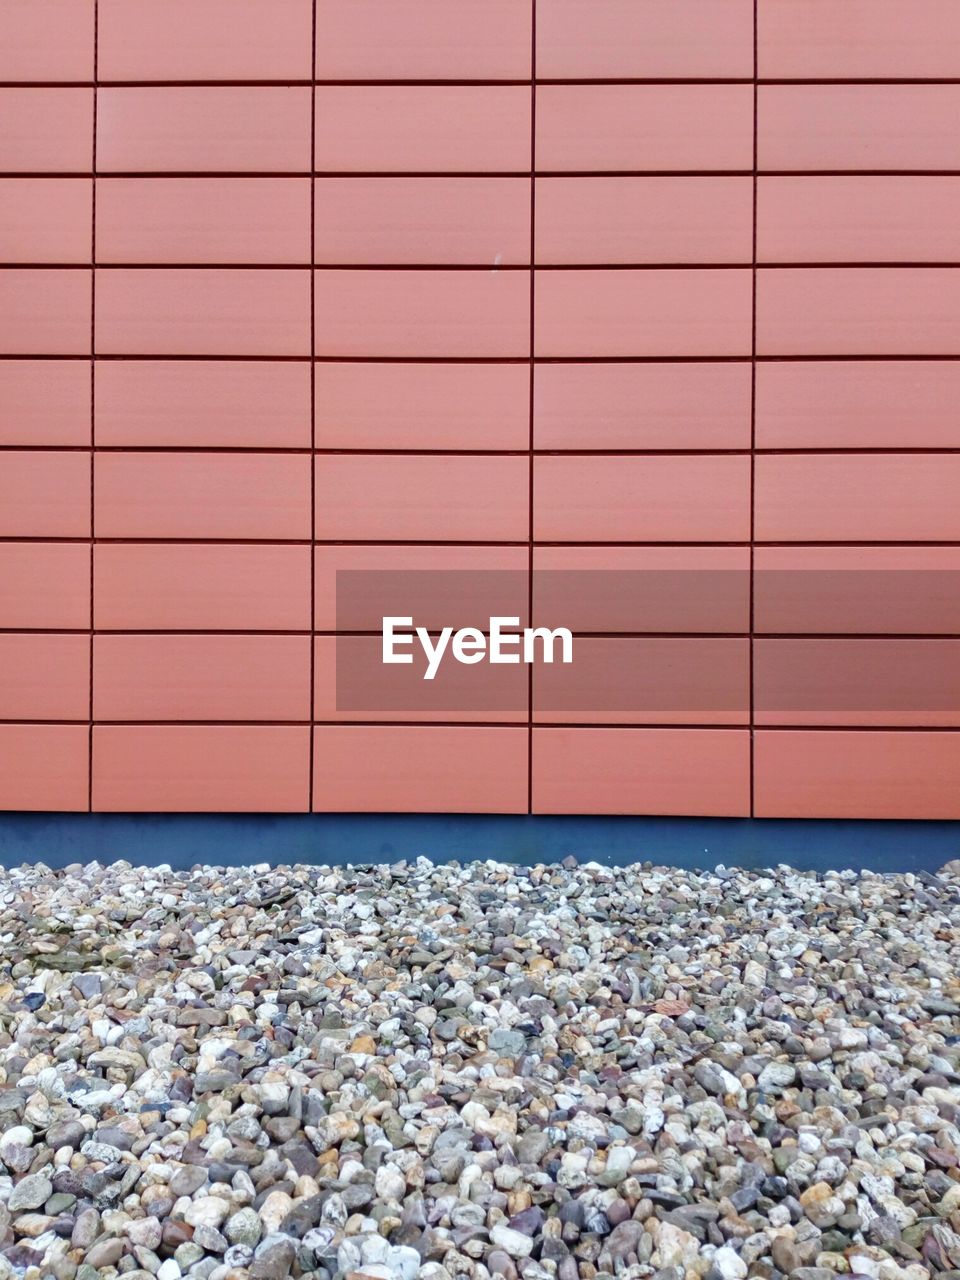 Pebbles and red tiled wall facade